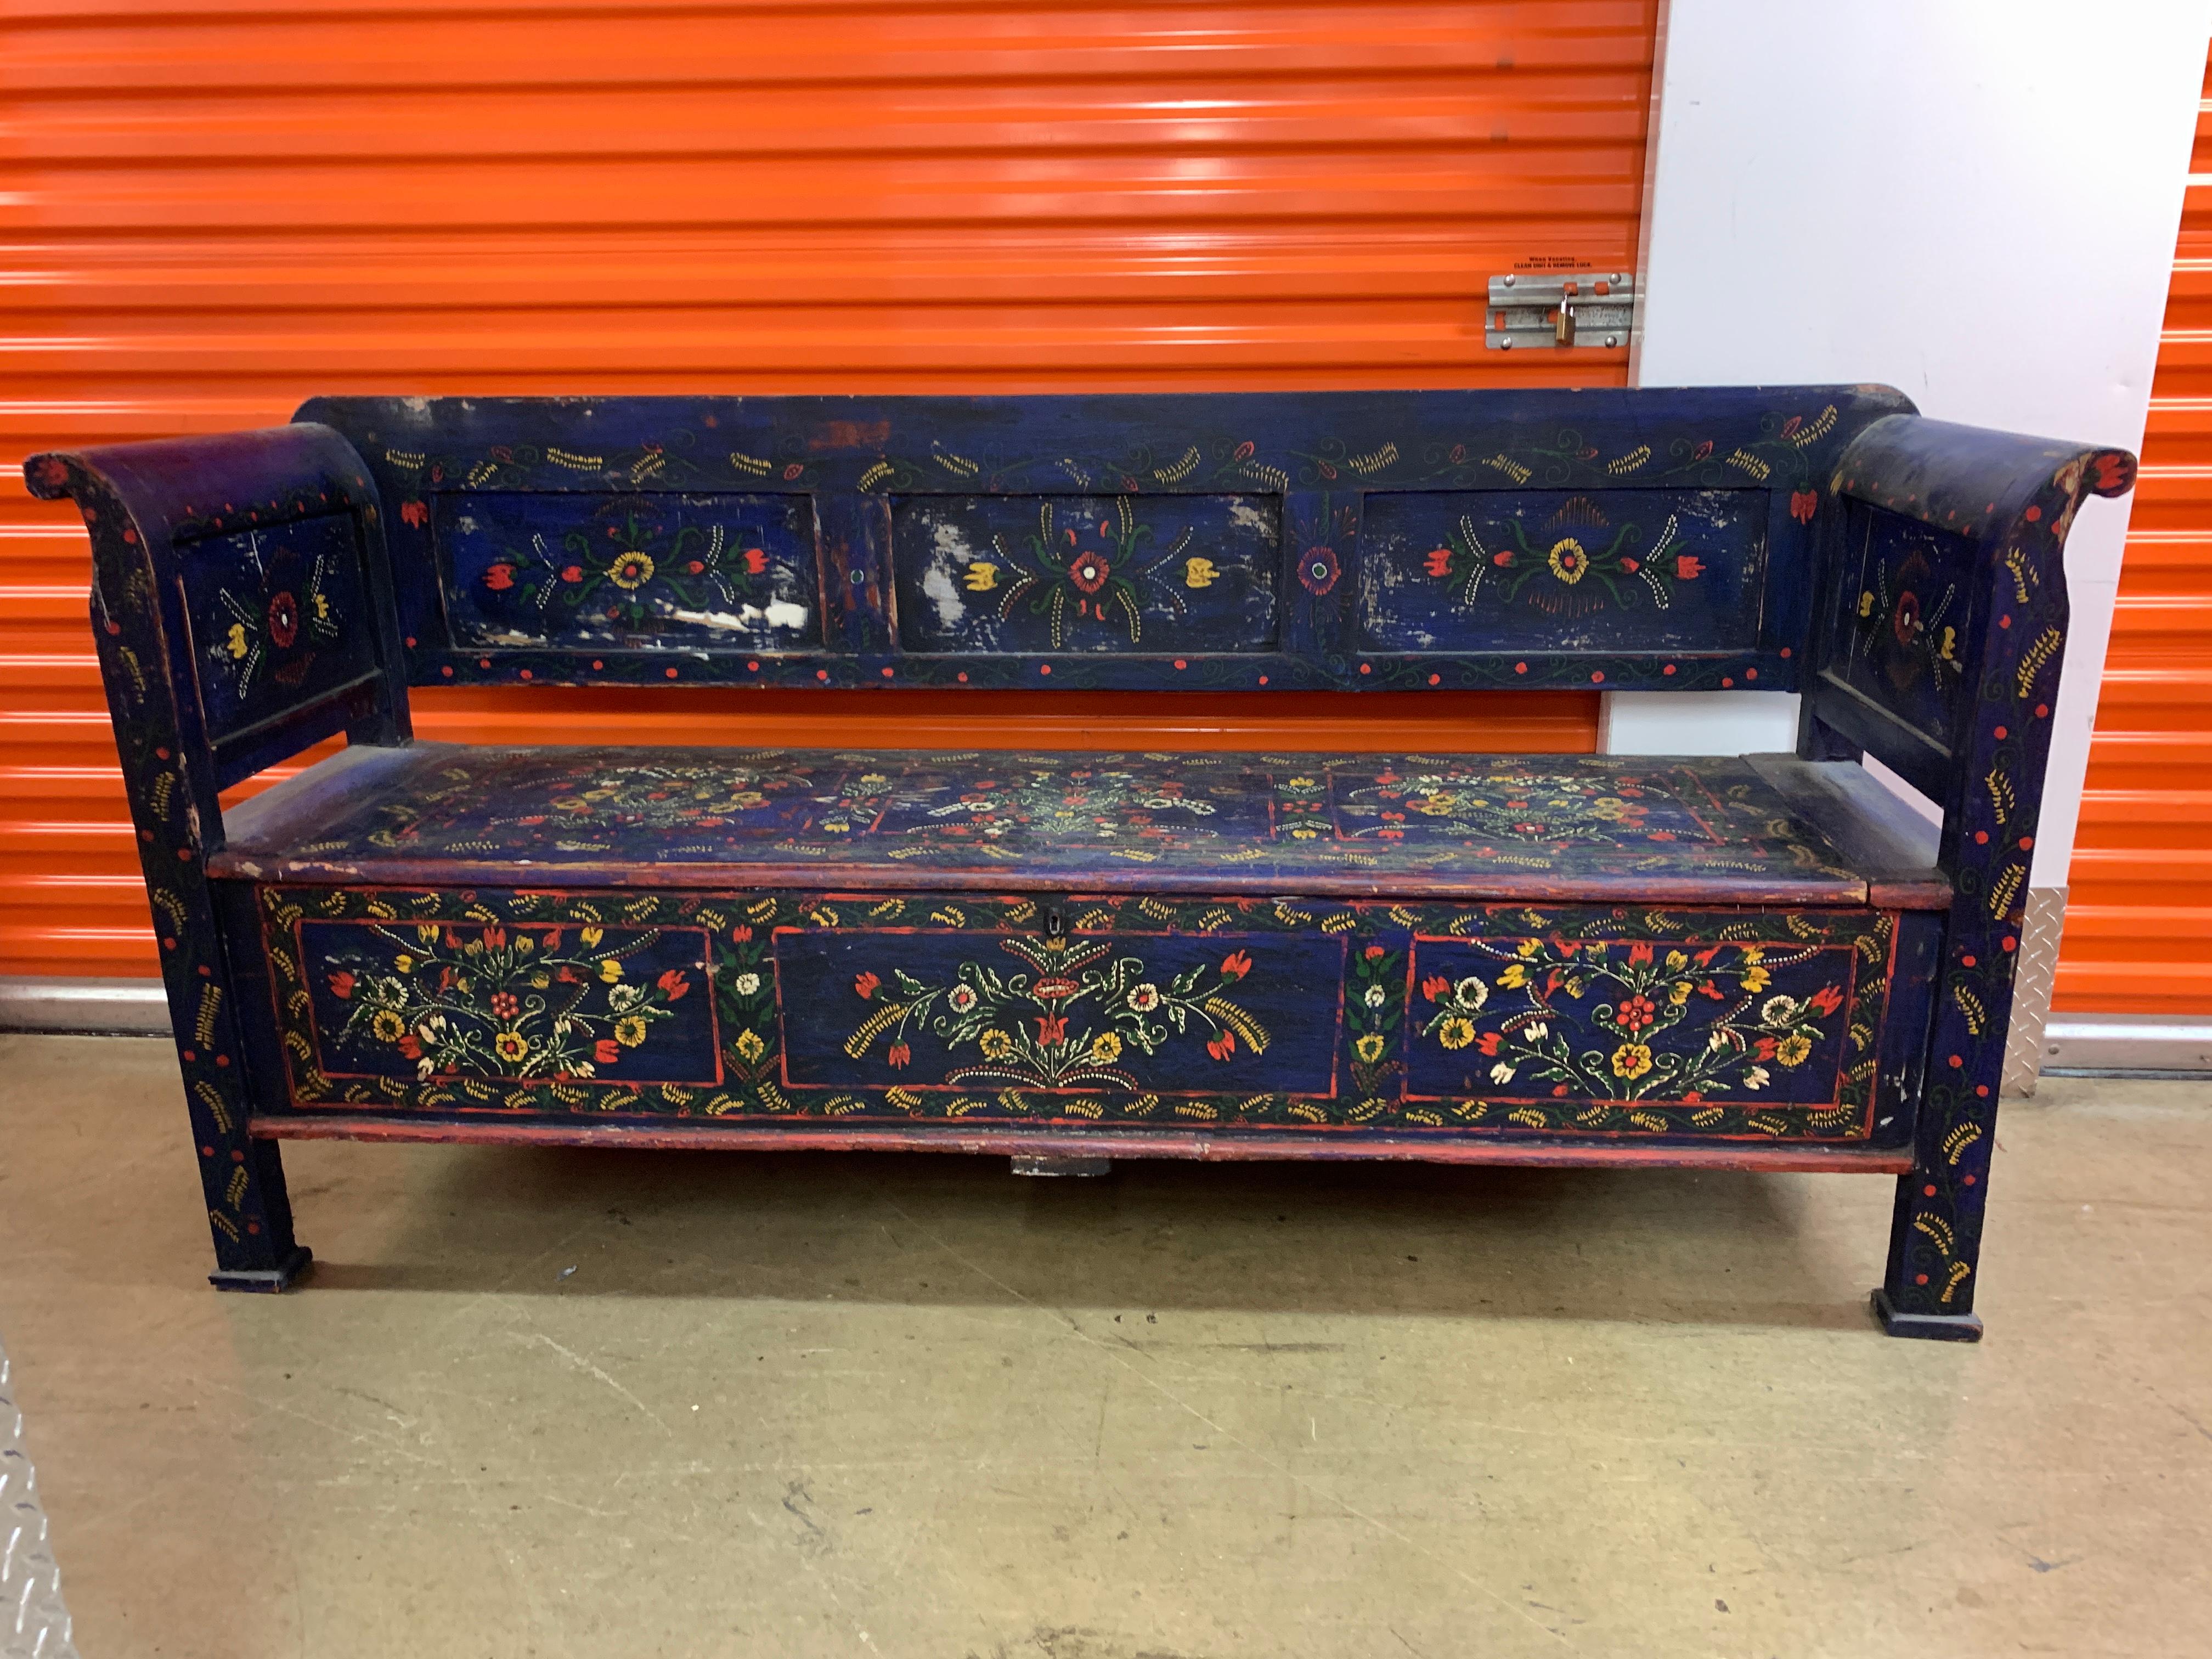 An absolutely striking antique Swedish bench with beautifully hand painted floral designs and a vibrant indigo blue that may register as ultra violet. This Swedish bench not only celebrates the traditional floral display but incorporates